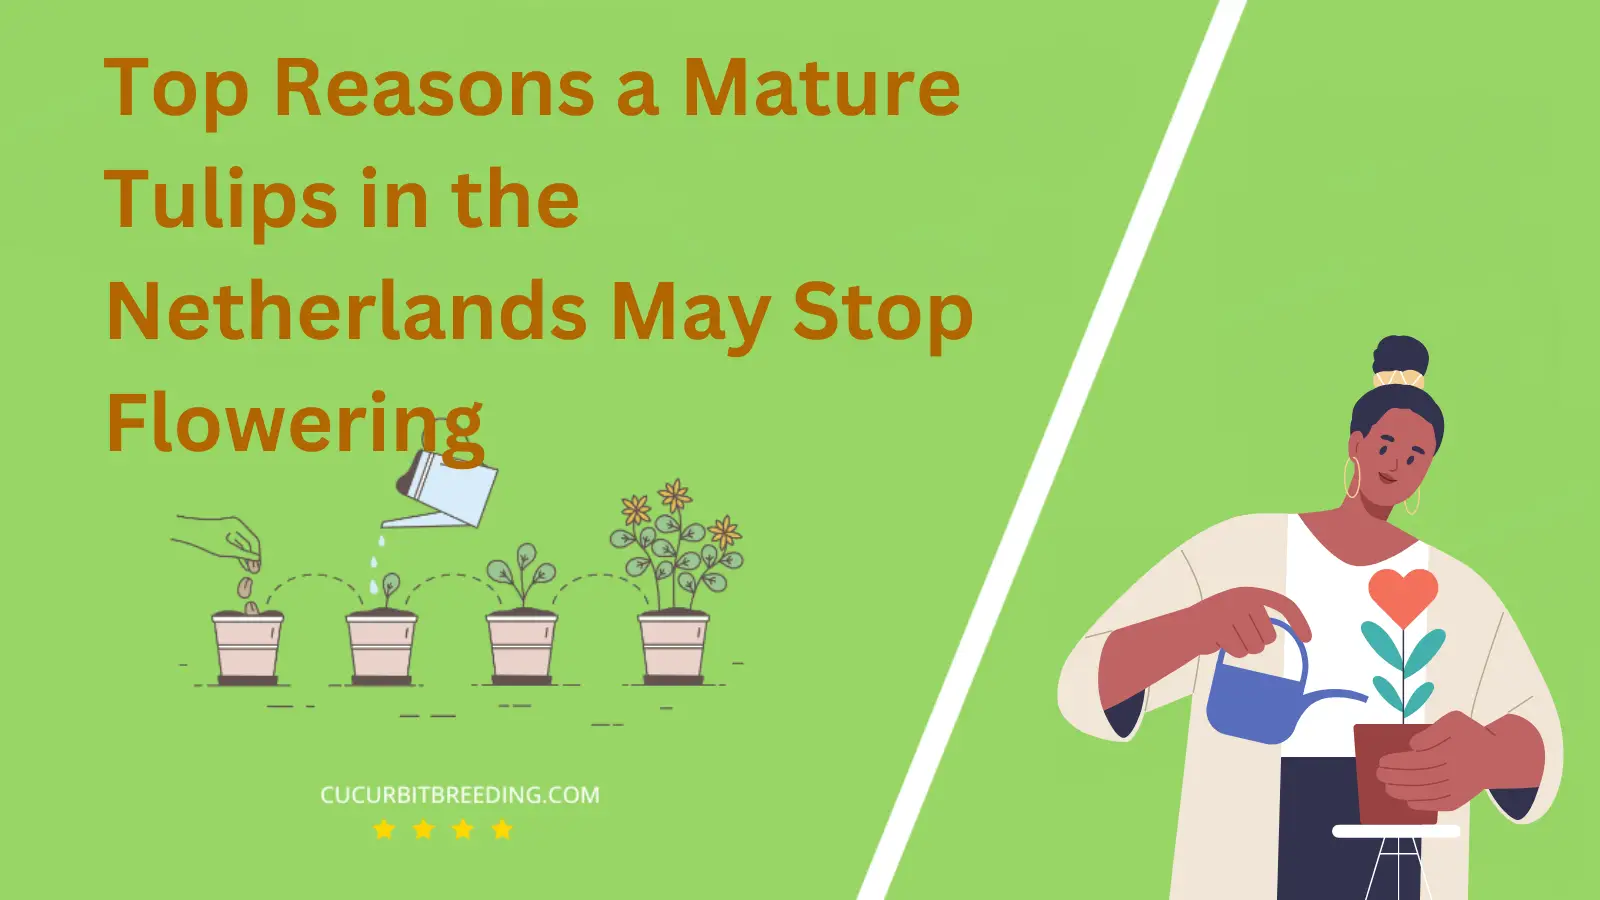 Top Reasons a Mature Tulips in the Netherlands May Stop Flowering